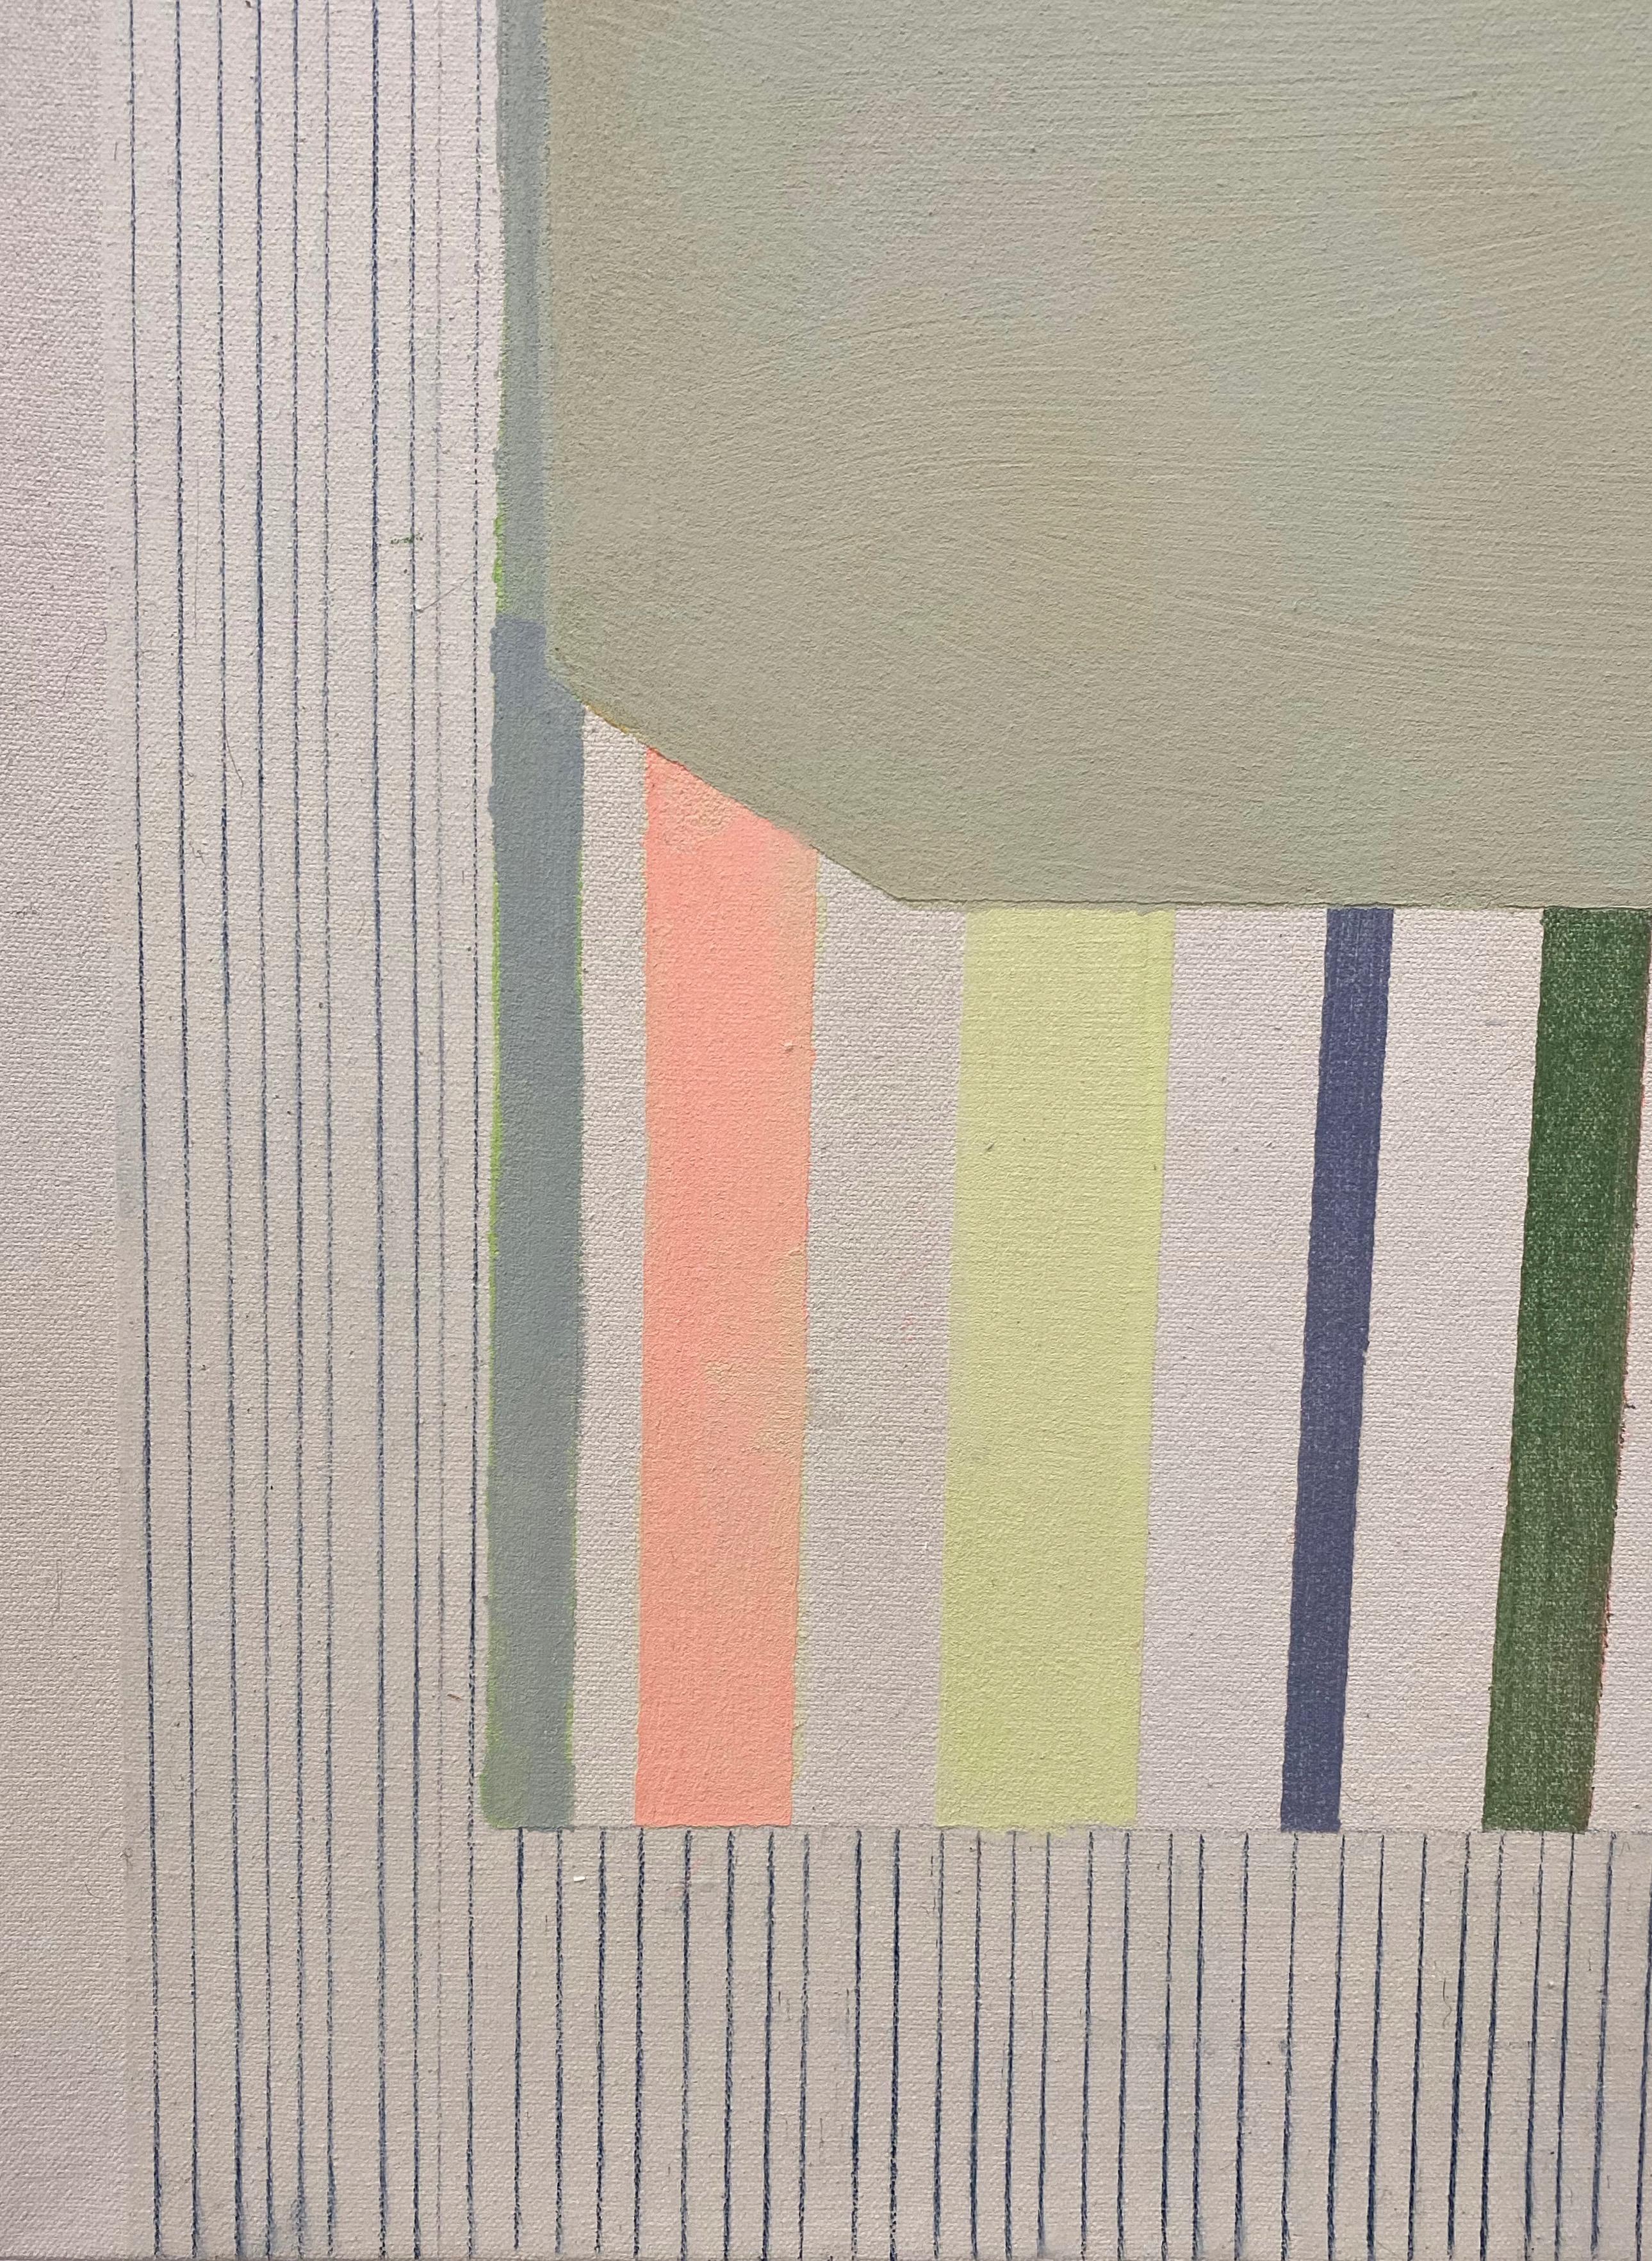 Clean and precise, carefully ordered stripes and blocks of color in light green, dark sage, yellow ochre, pale lemon yellow and burnt orange are lively and vibrant against the neutral beige background. Signed, dated and titled on verso.

Elizabeth